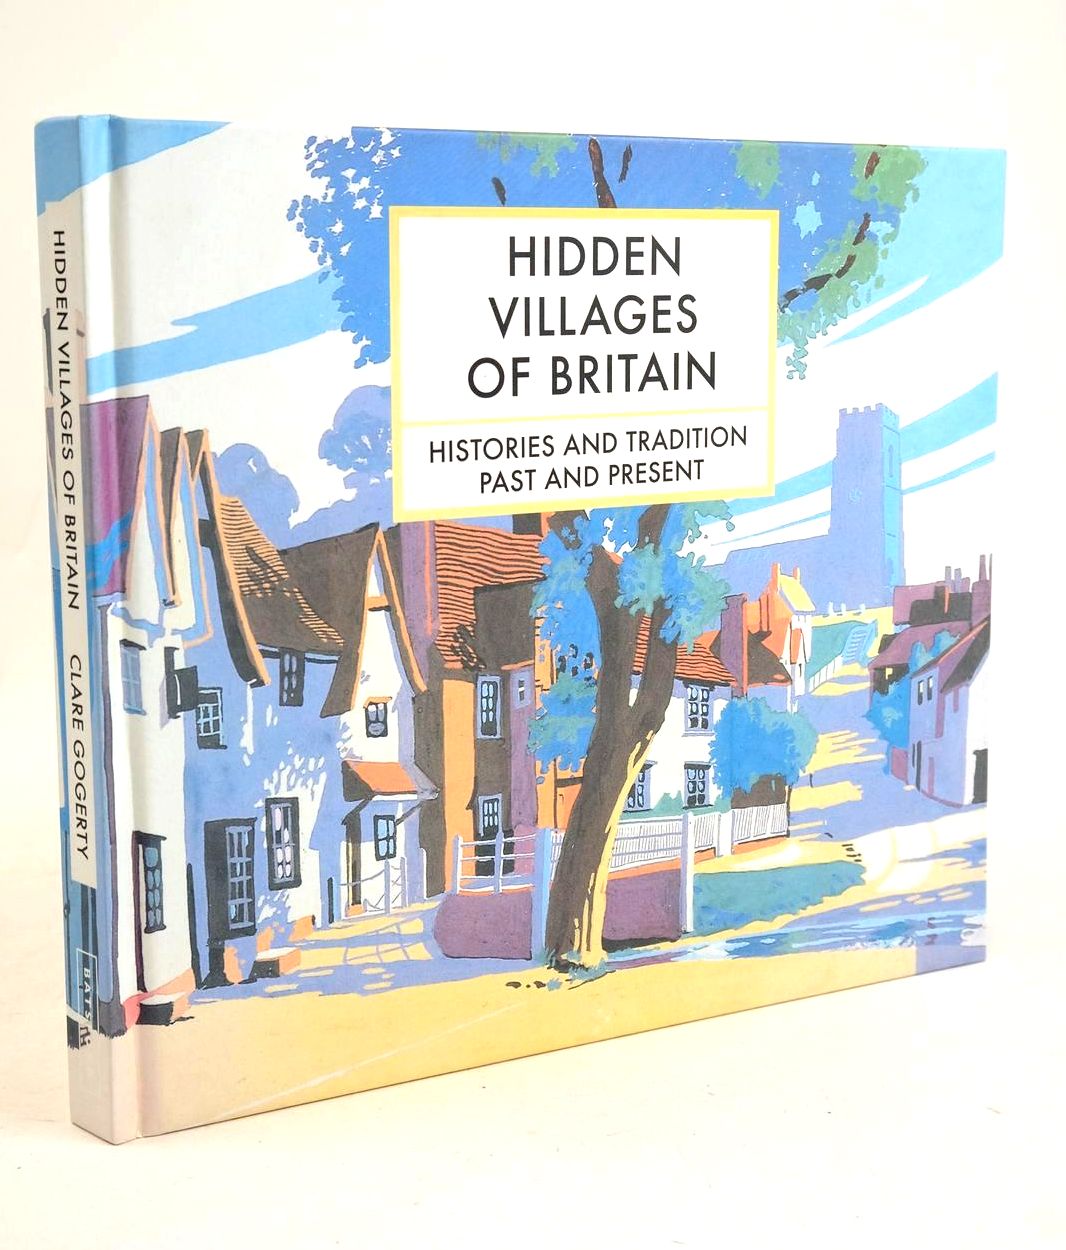 Photo of HIDDEN VILLAGES OF BRITAIN: HISTORIES AND TRADITION PAST AND PRESENT written by Gogerty, Clare illustrated by Cook, Brian published by Batsford (STOCK CODE: 1327962)  for sale by Stella & Rose's Books